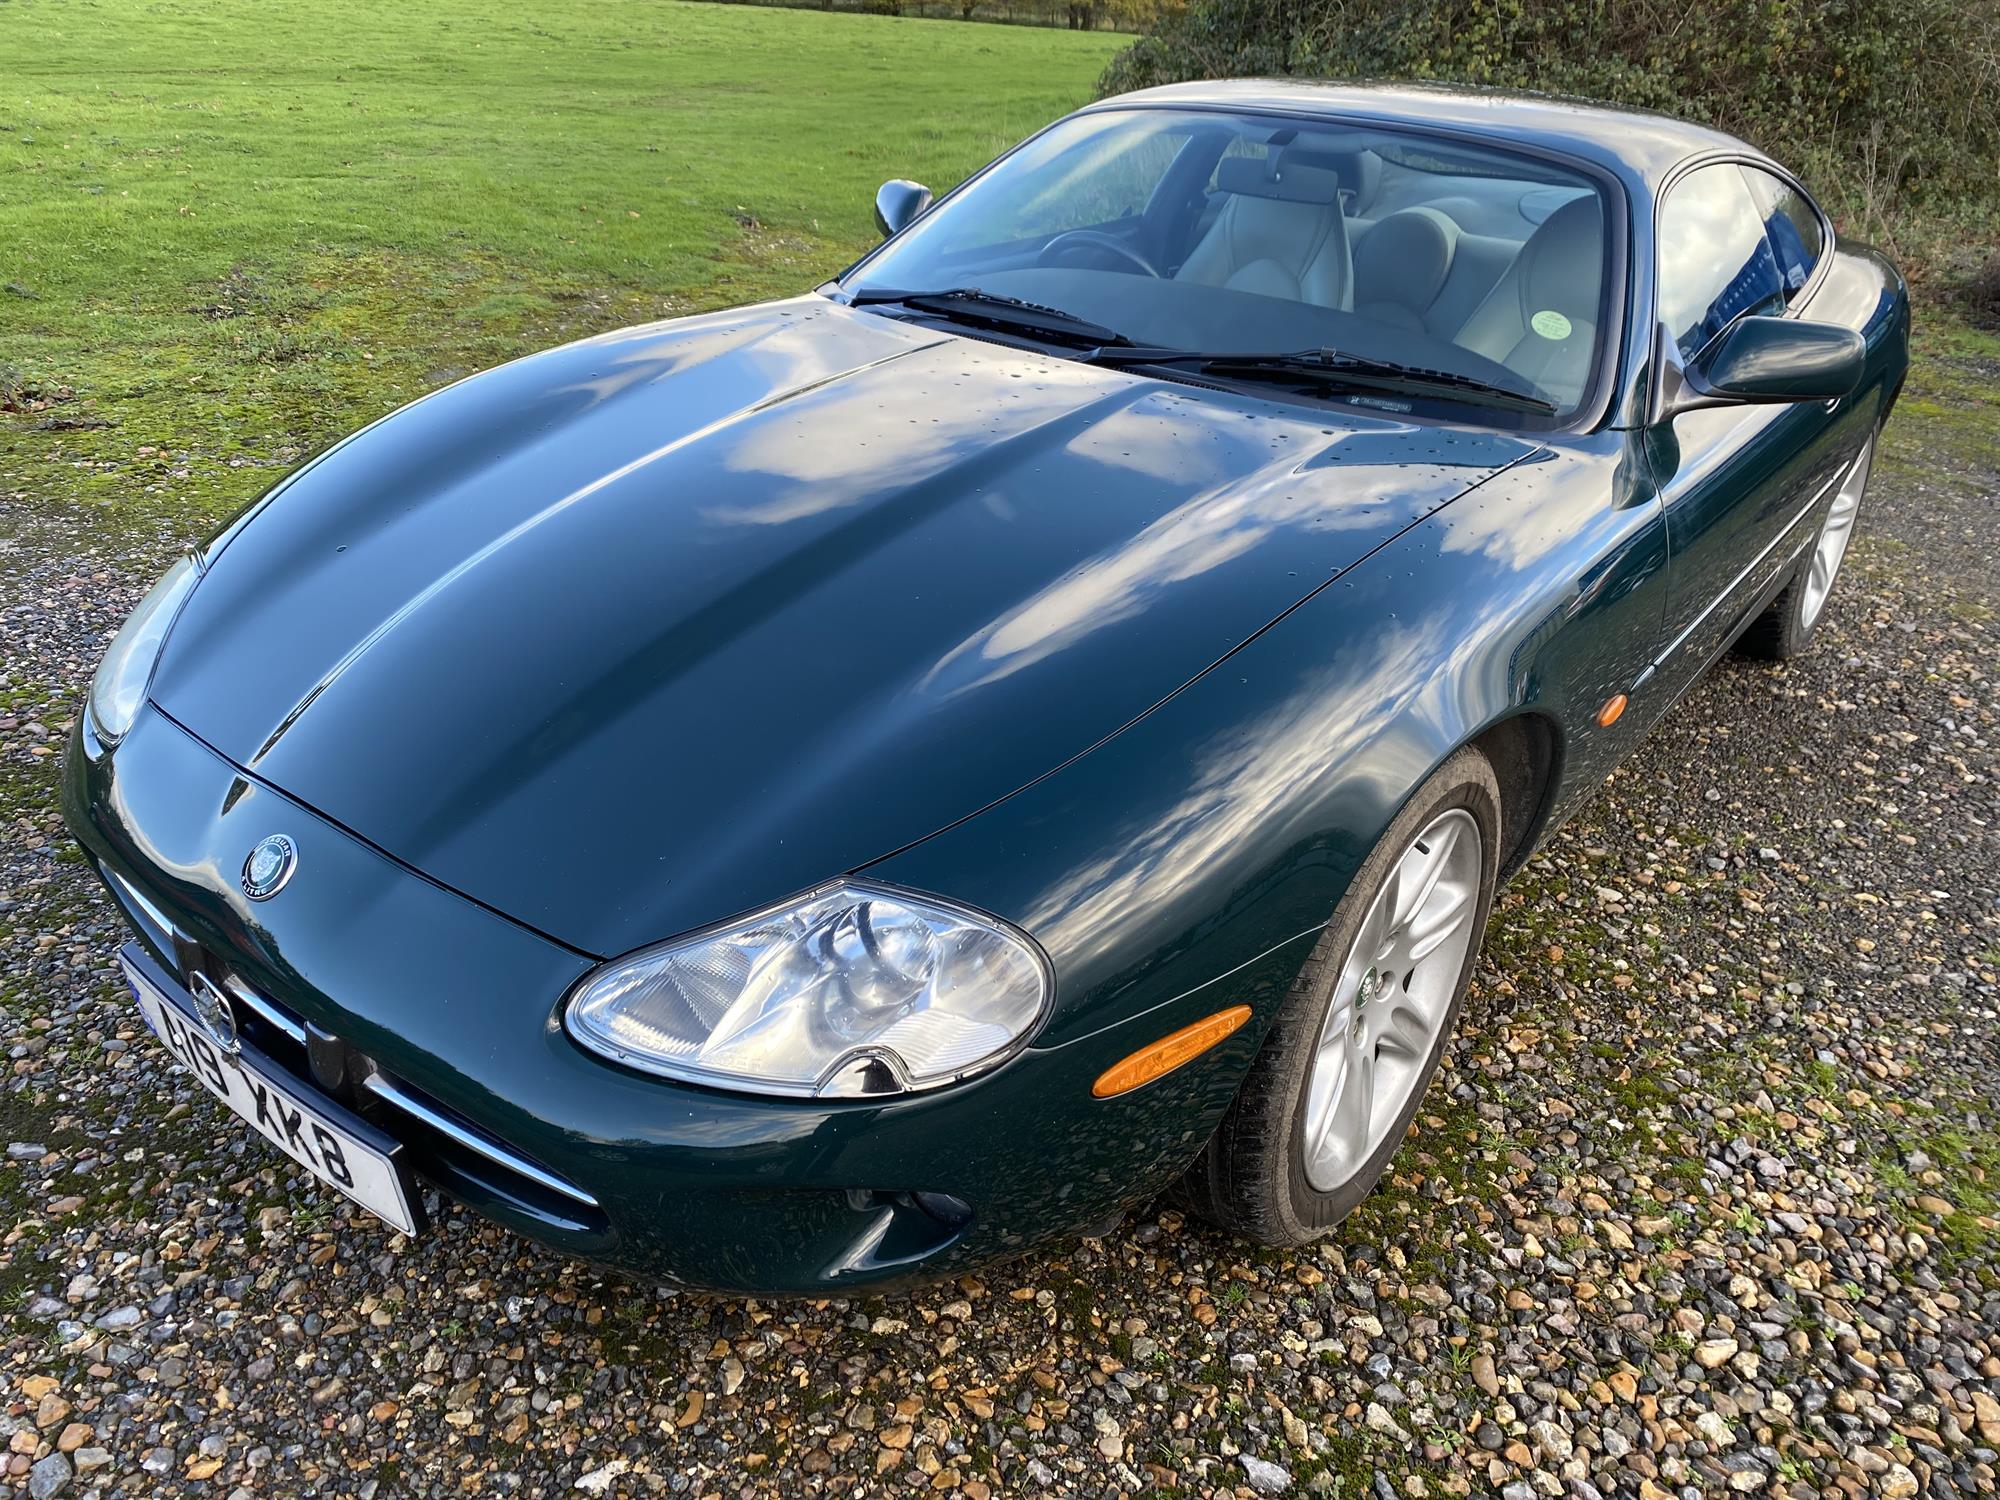 1996 Jaguar XK8 4.0 Automatic. Registration number: A19 XKB. - Genuine low mileage from new - Image 6 of 12